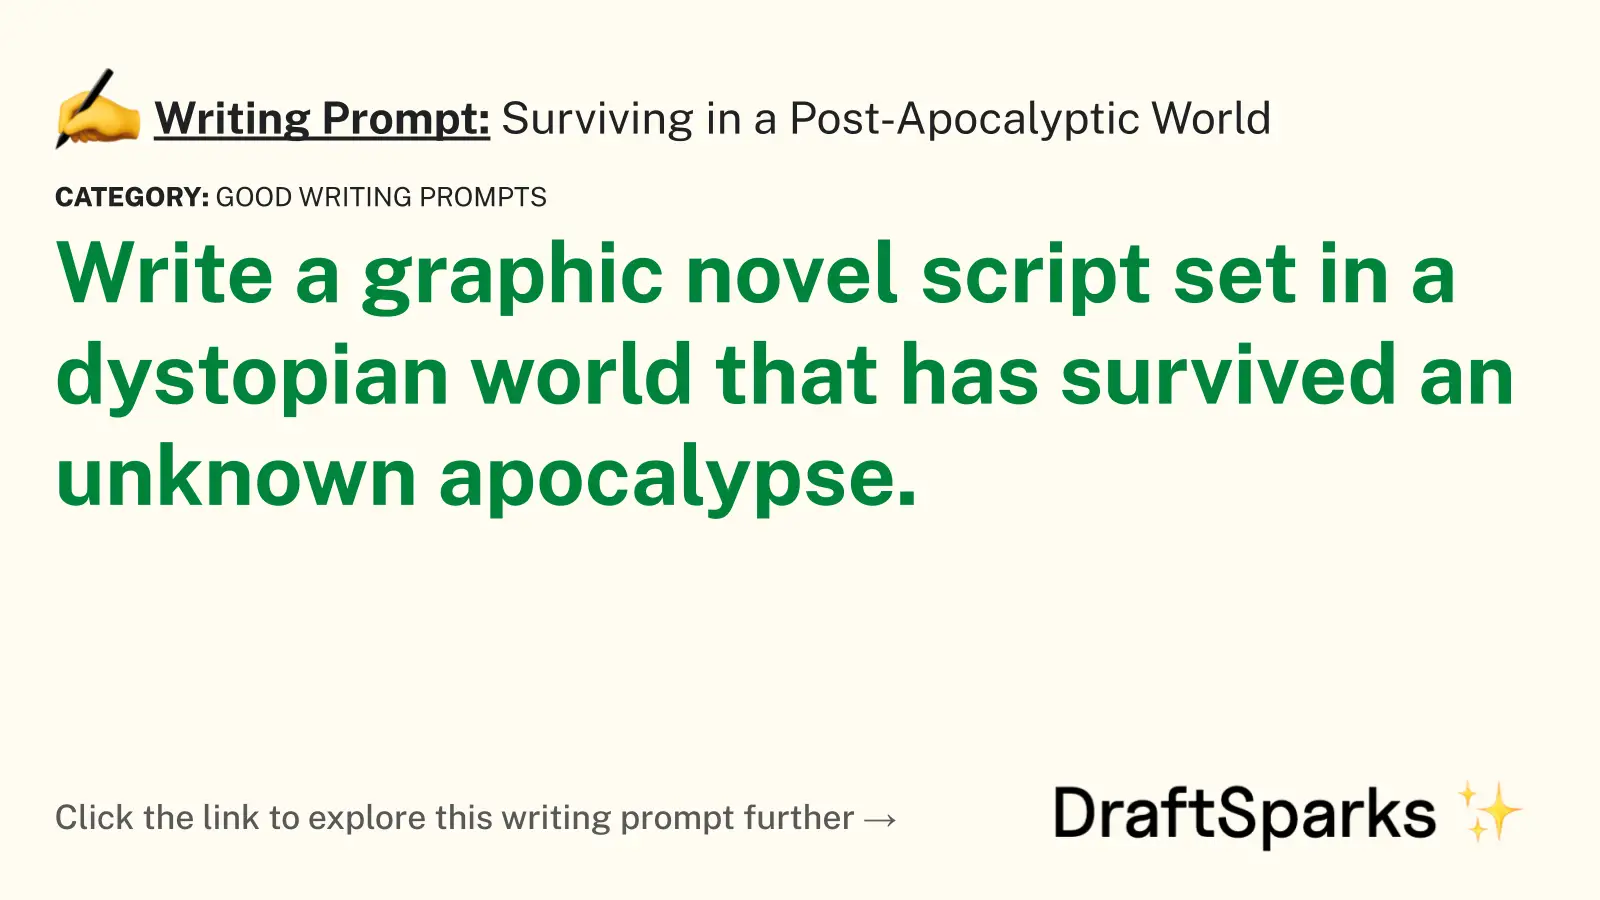 Surviving in a Post-Apocalyptic World